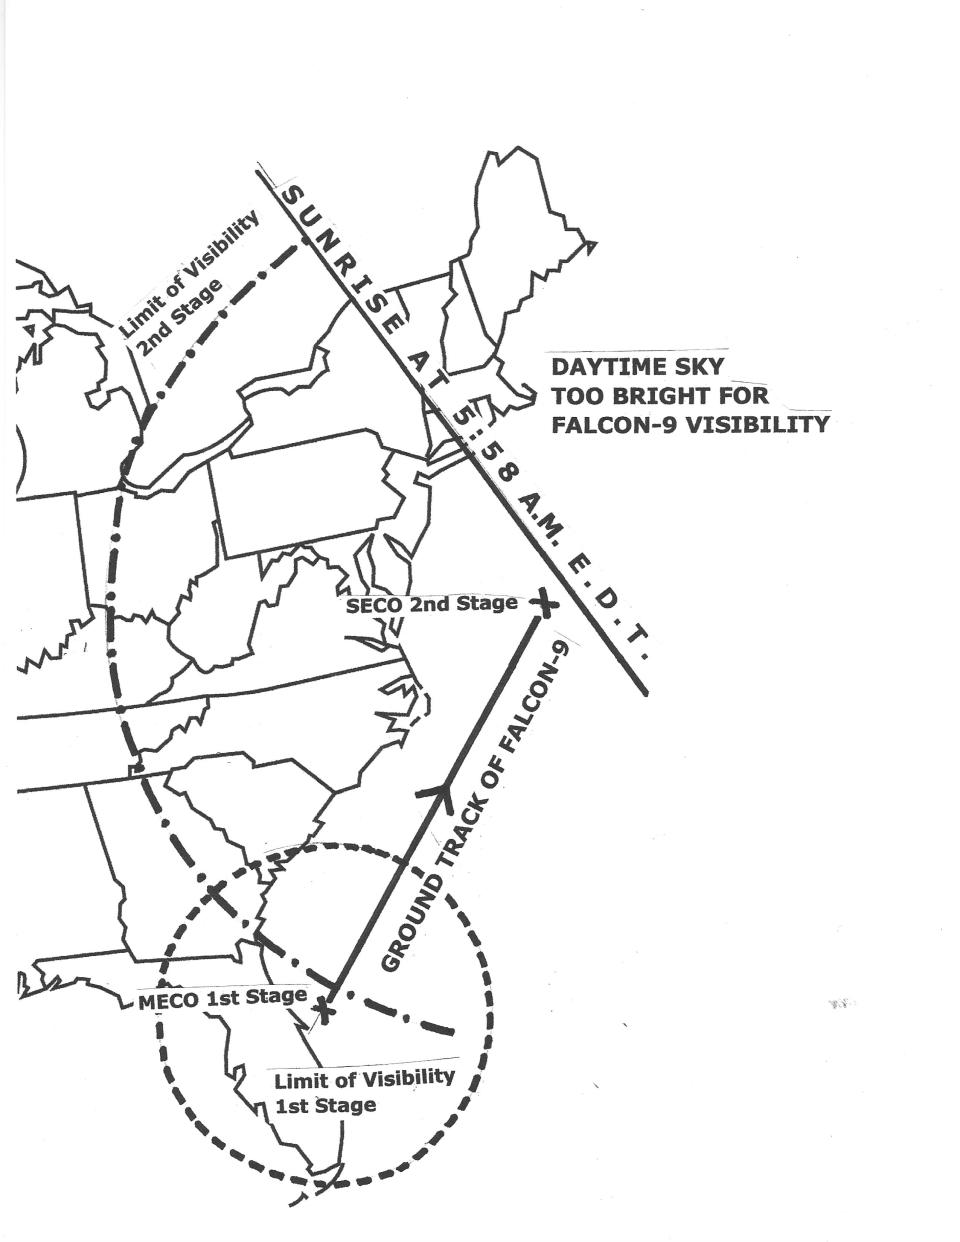 This sky map shows the U.S. East Coast visibility area for SpaceX's Falcon 9 rocket and Crew-2 astronaut launch on April 23, 2021.